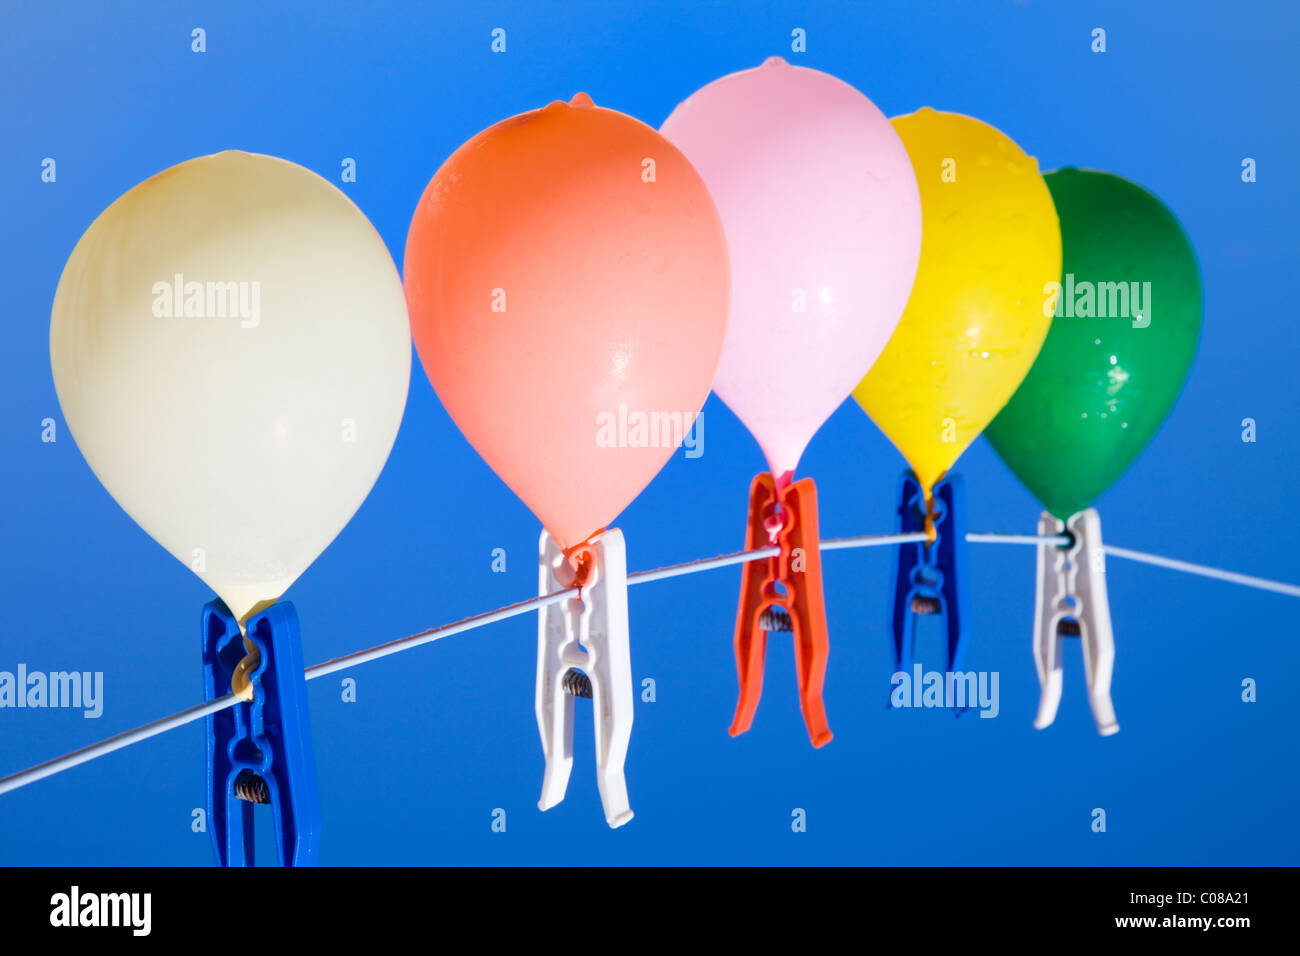 Group of colored water filled balloons hanging on a clothesline with a blue sky as background, seen from below Stock Photo